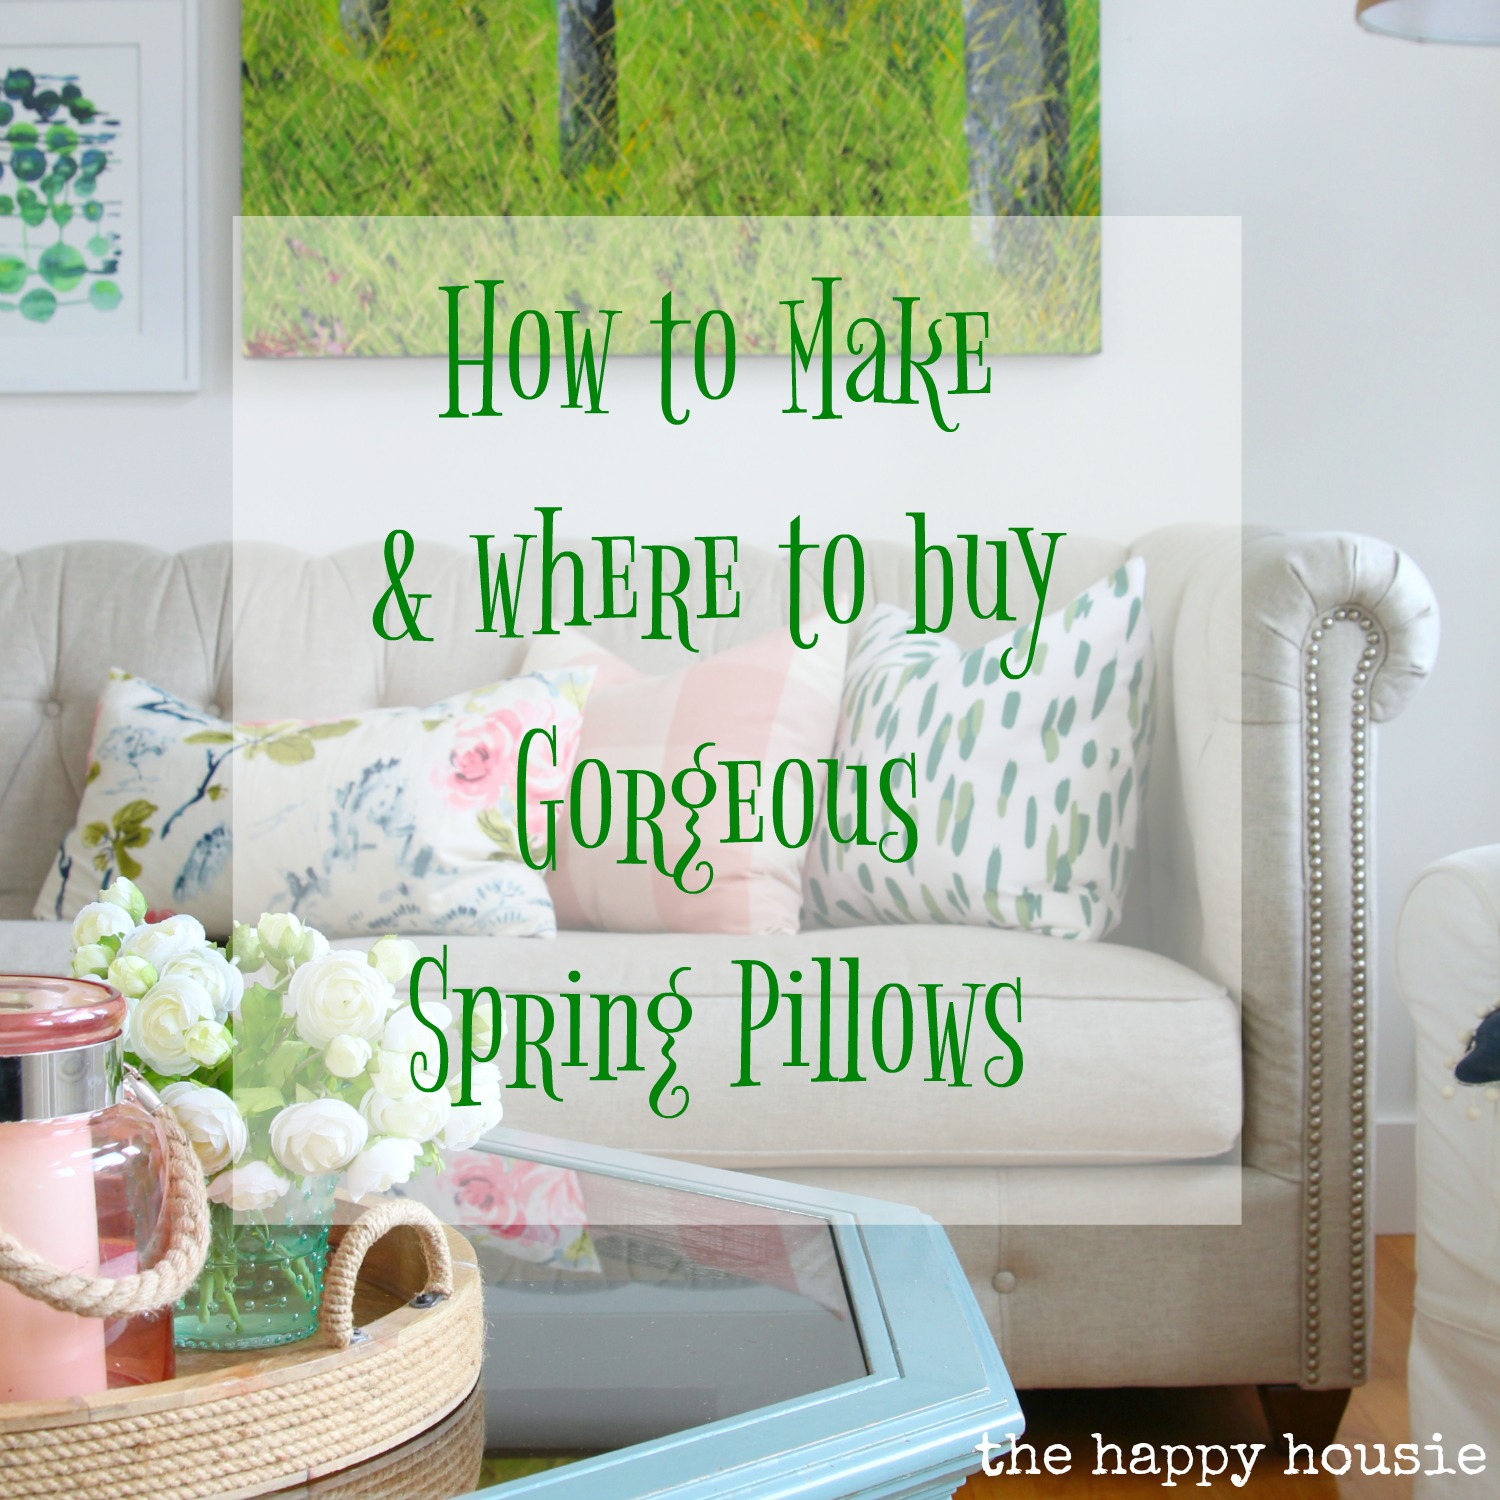 How to Make & Where to Buy Gorgeous Spring Pillows